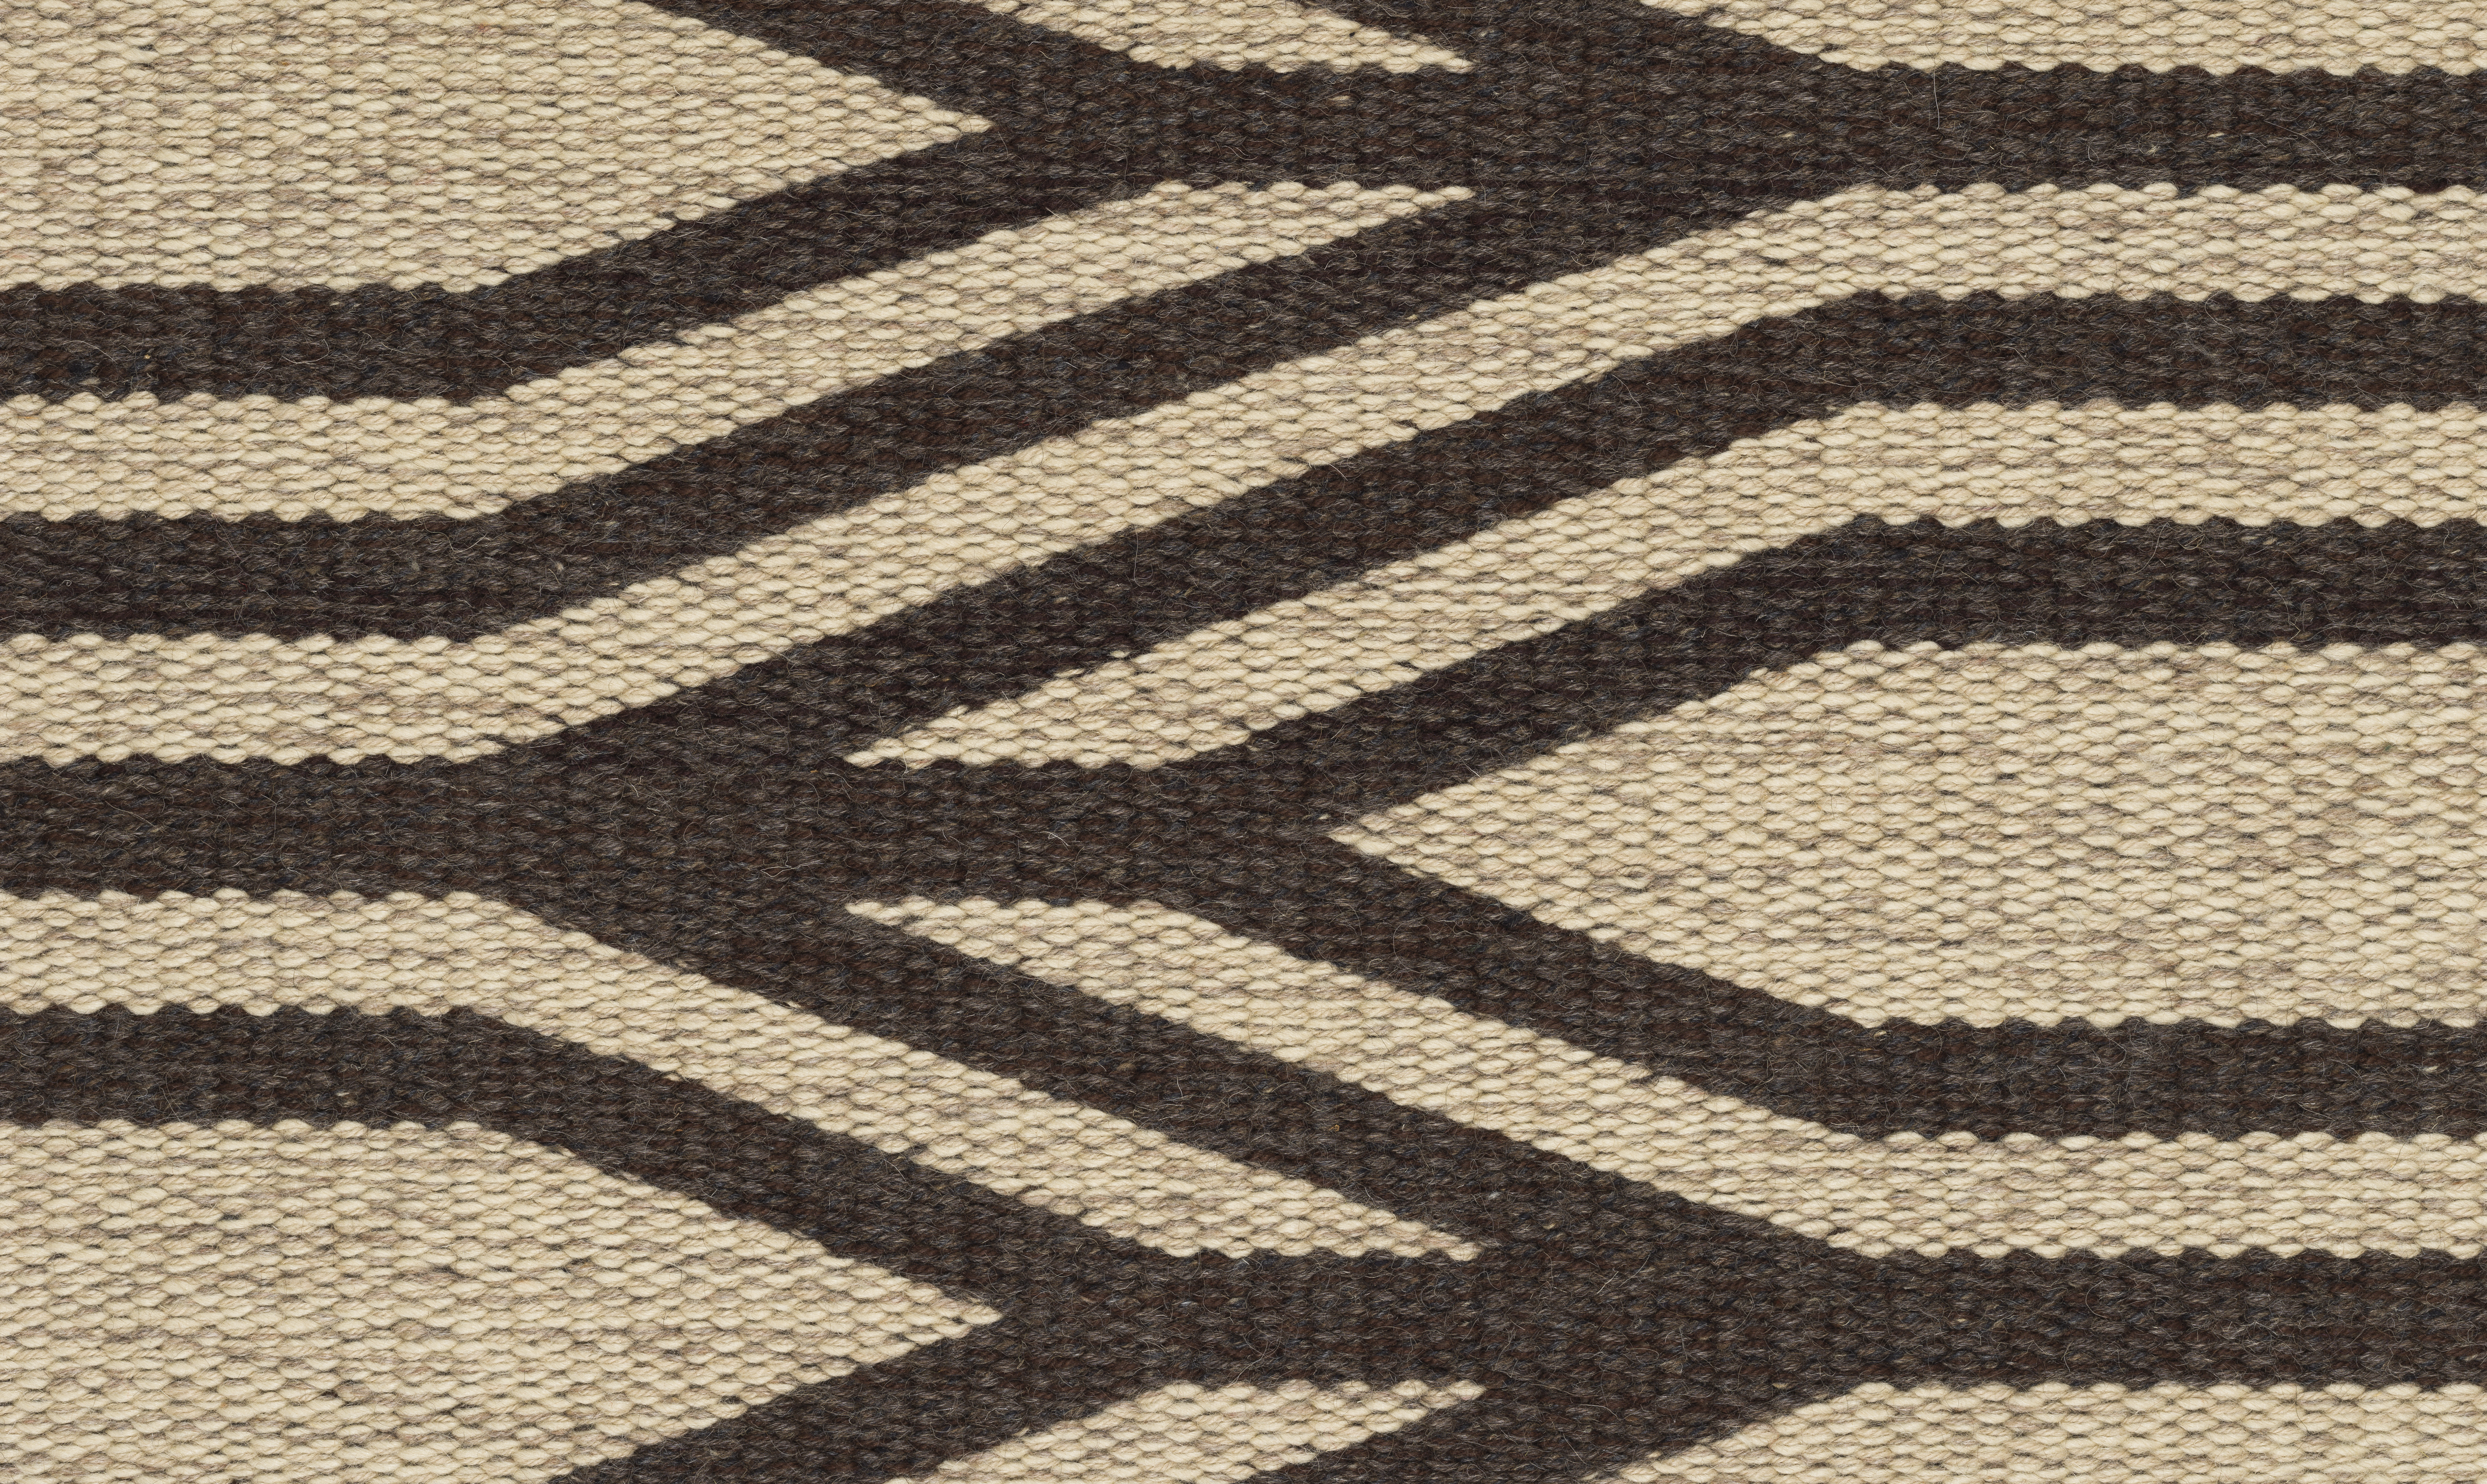 Jane Busse's Branches, a close up photograph of thick woven lines intersecting in a rigid pattern